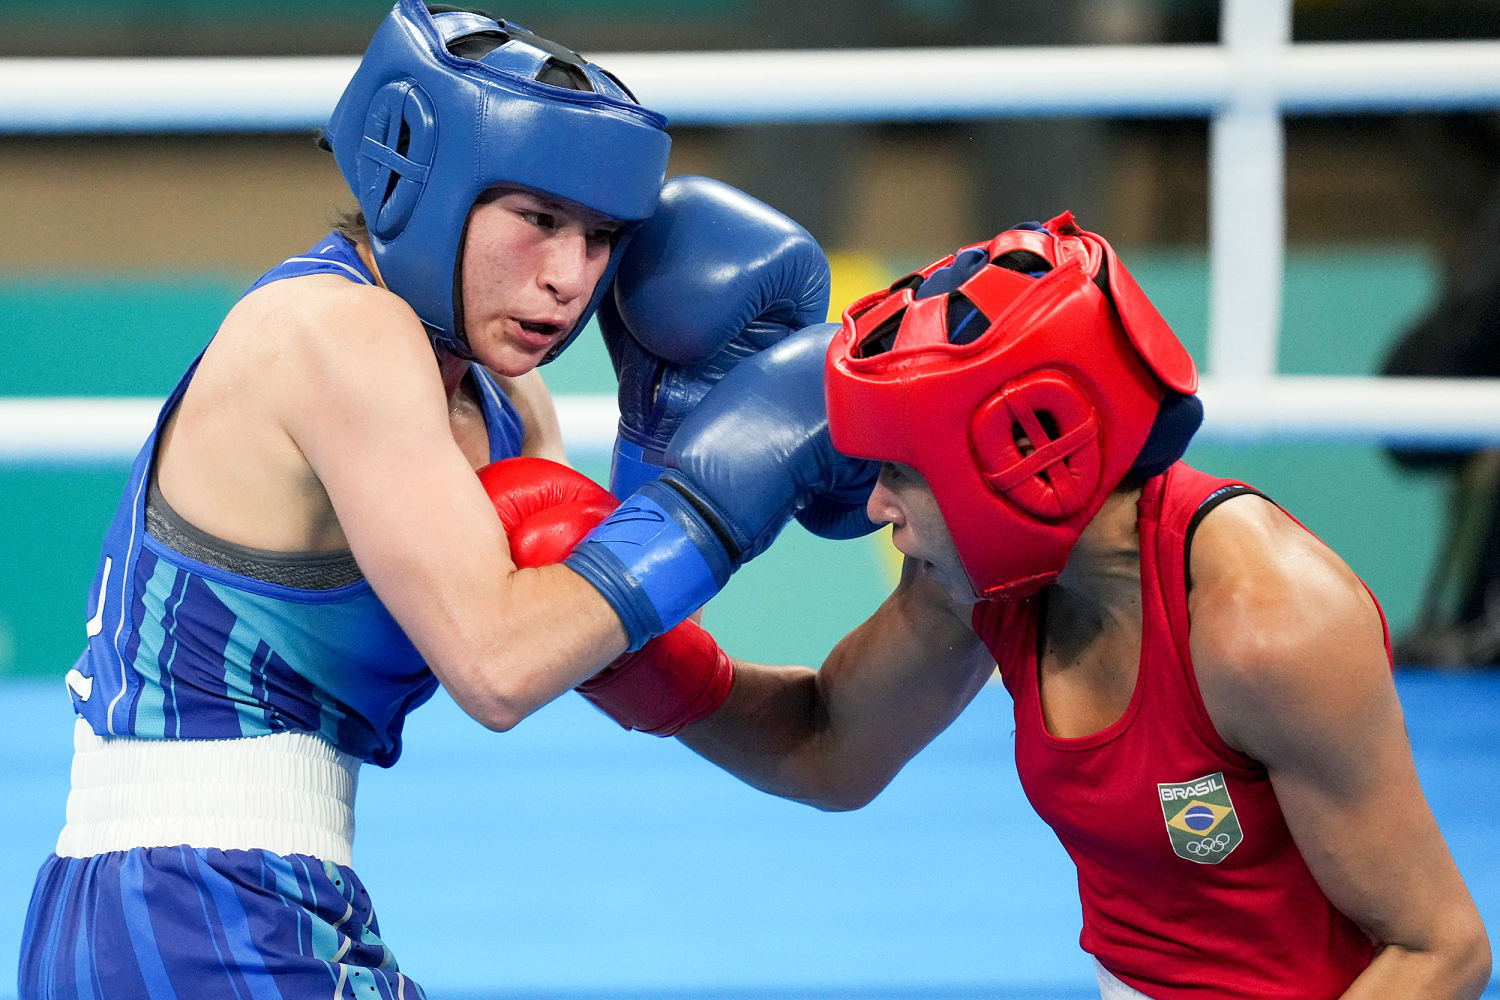 Bullied as a kid, she channeled her response into a U.S. Olympic boxing career  